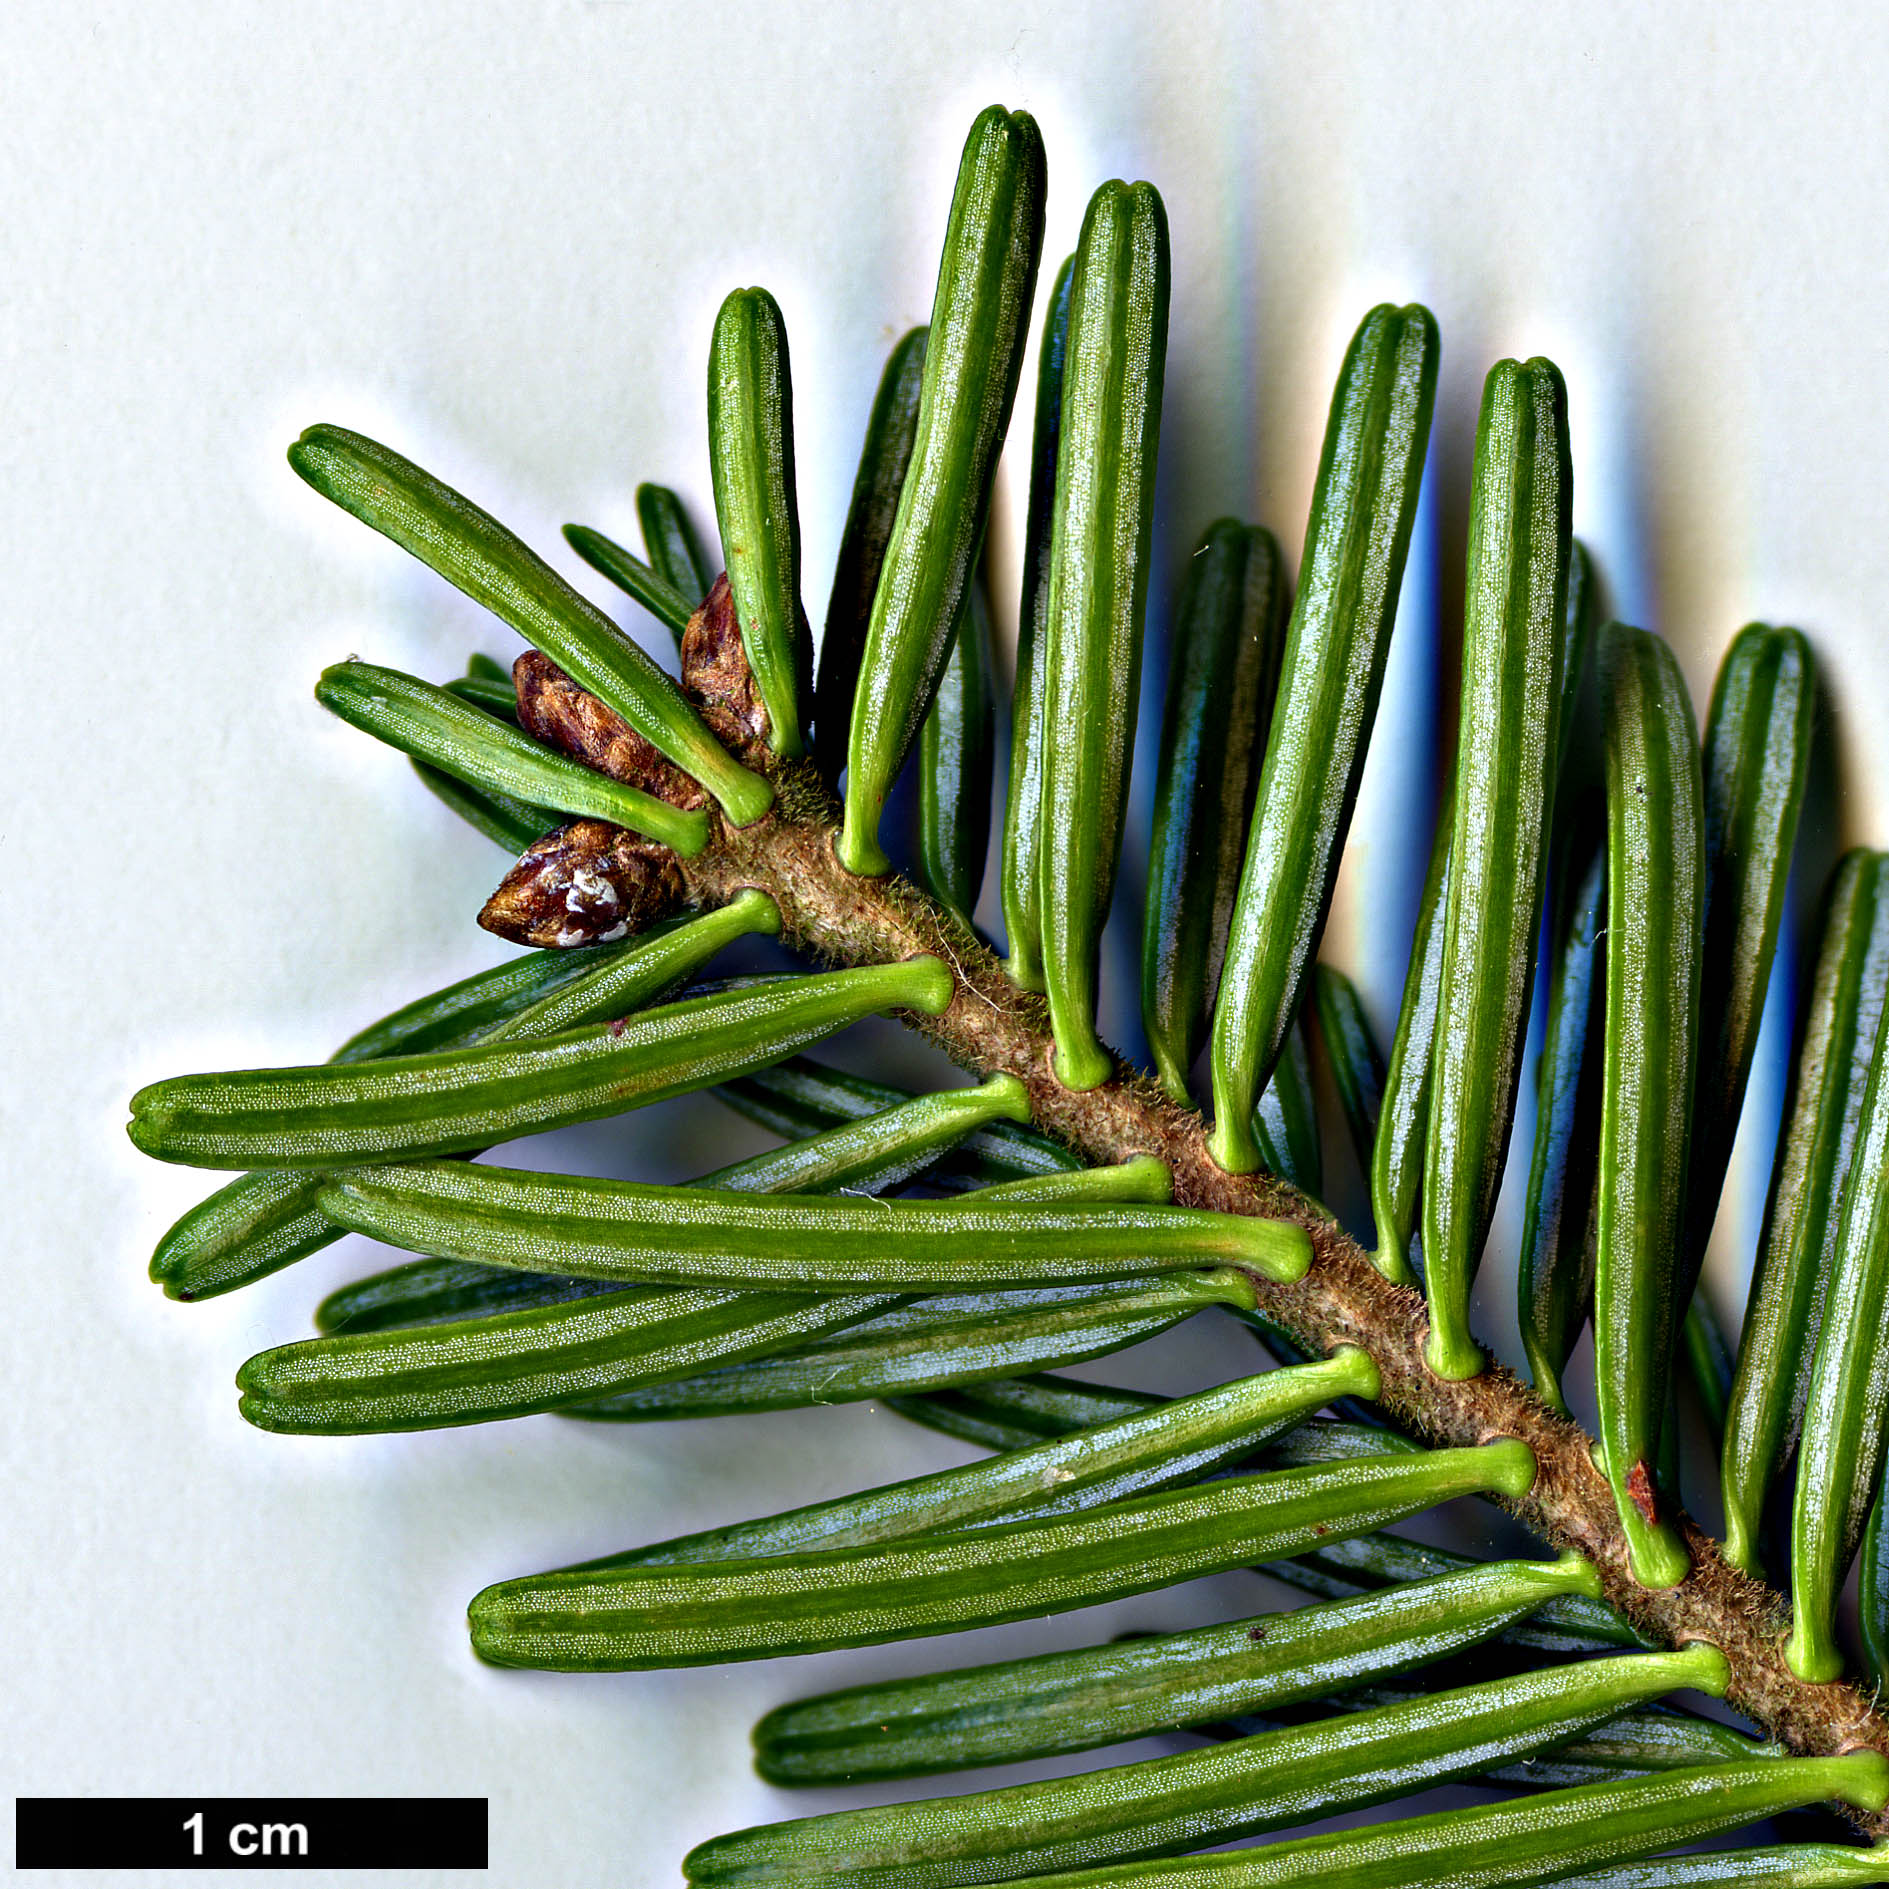 High resolution image: Family: Pinaceae - Genus: Abies - Taxon: pardei